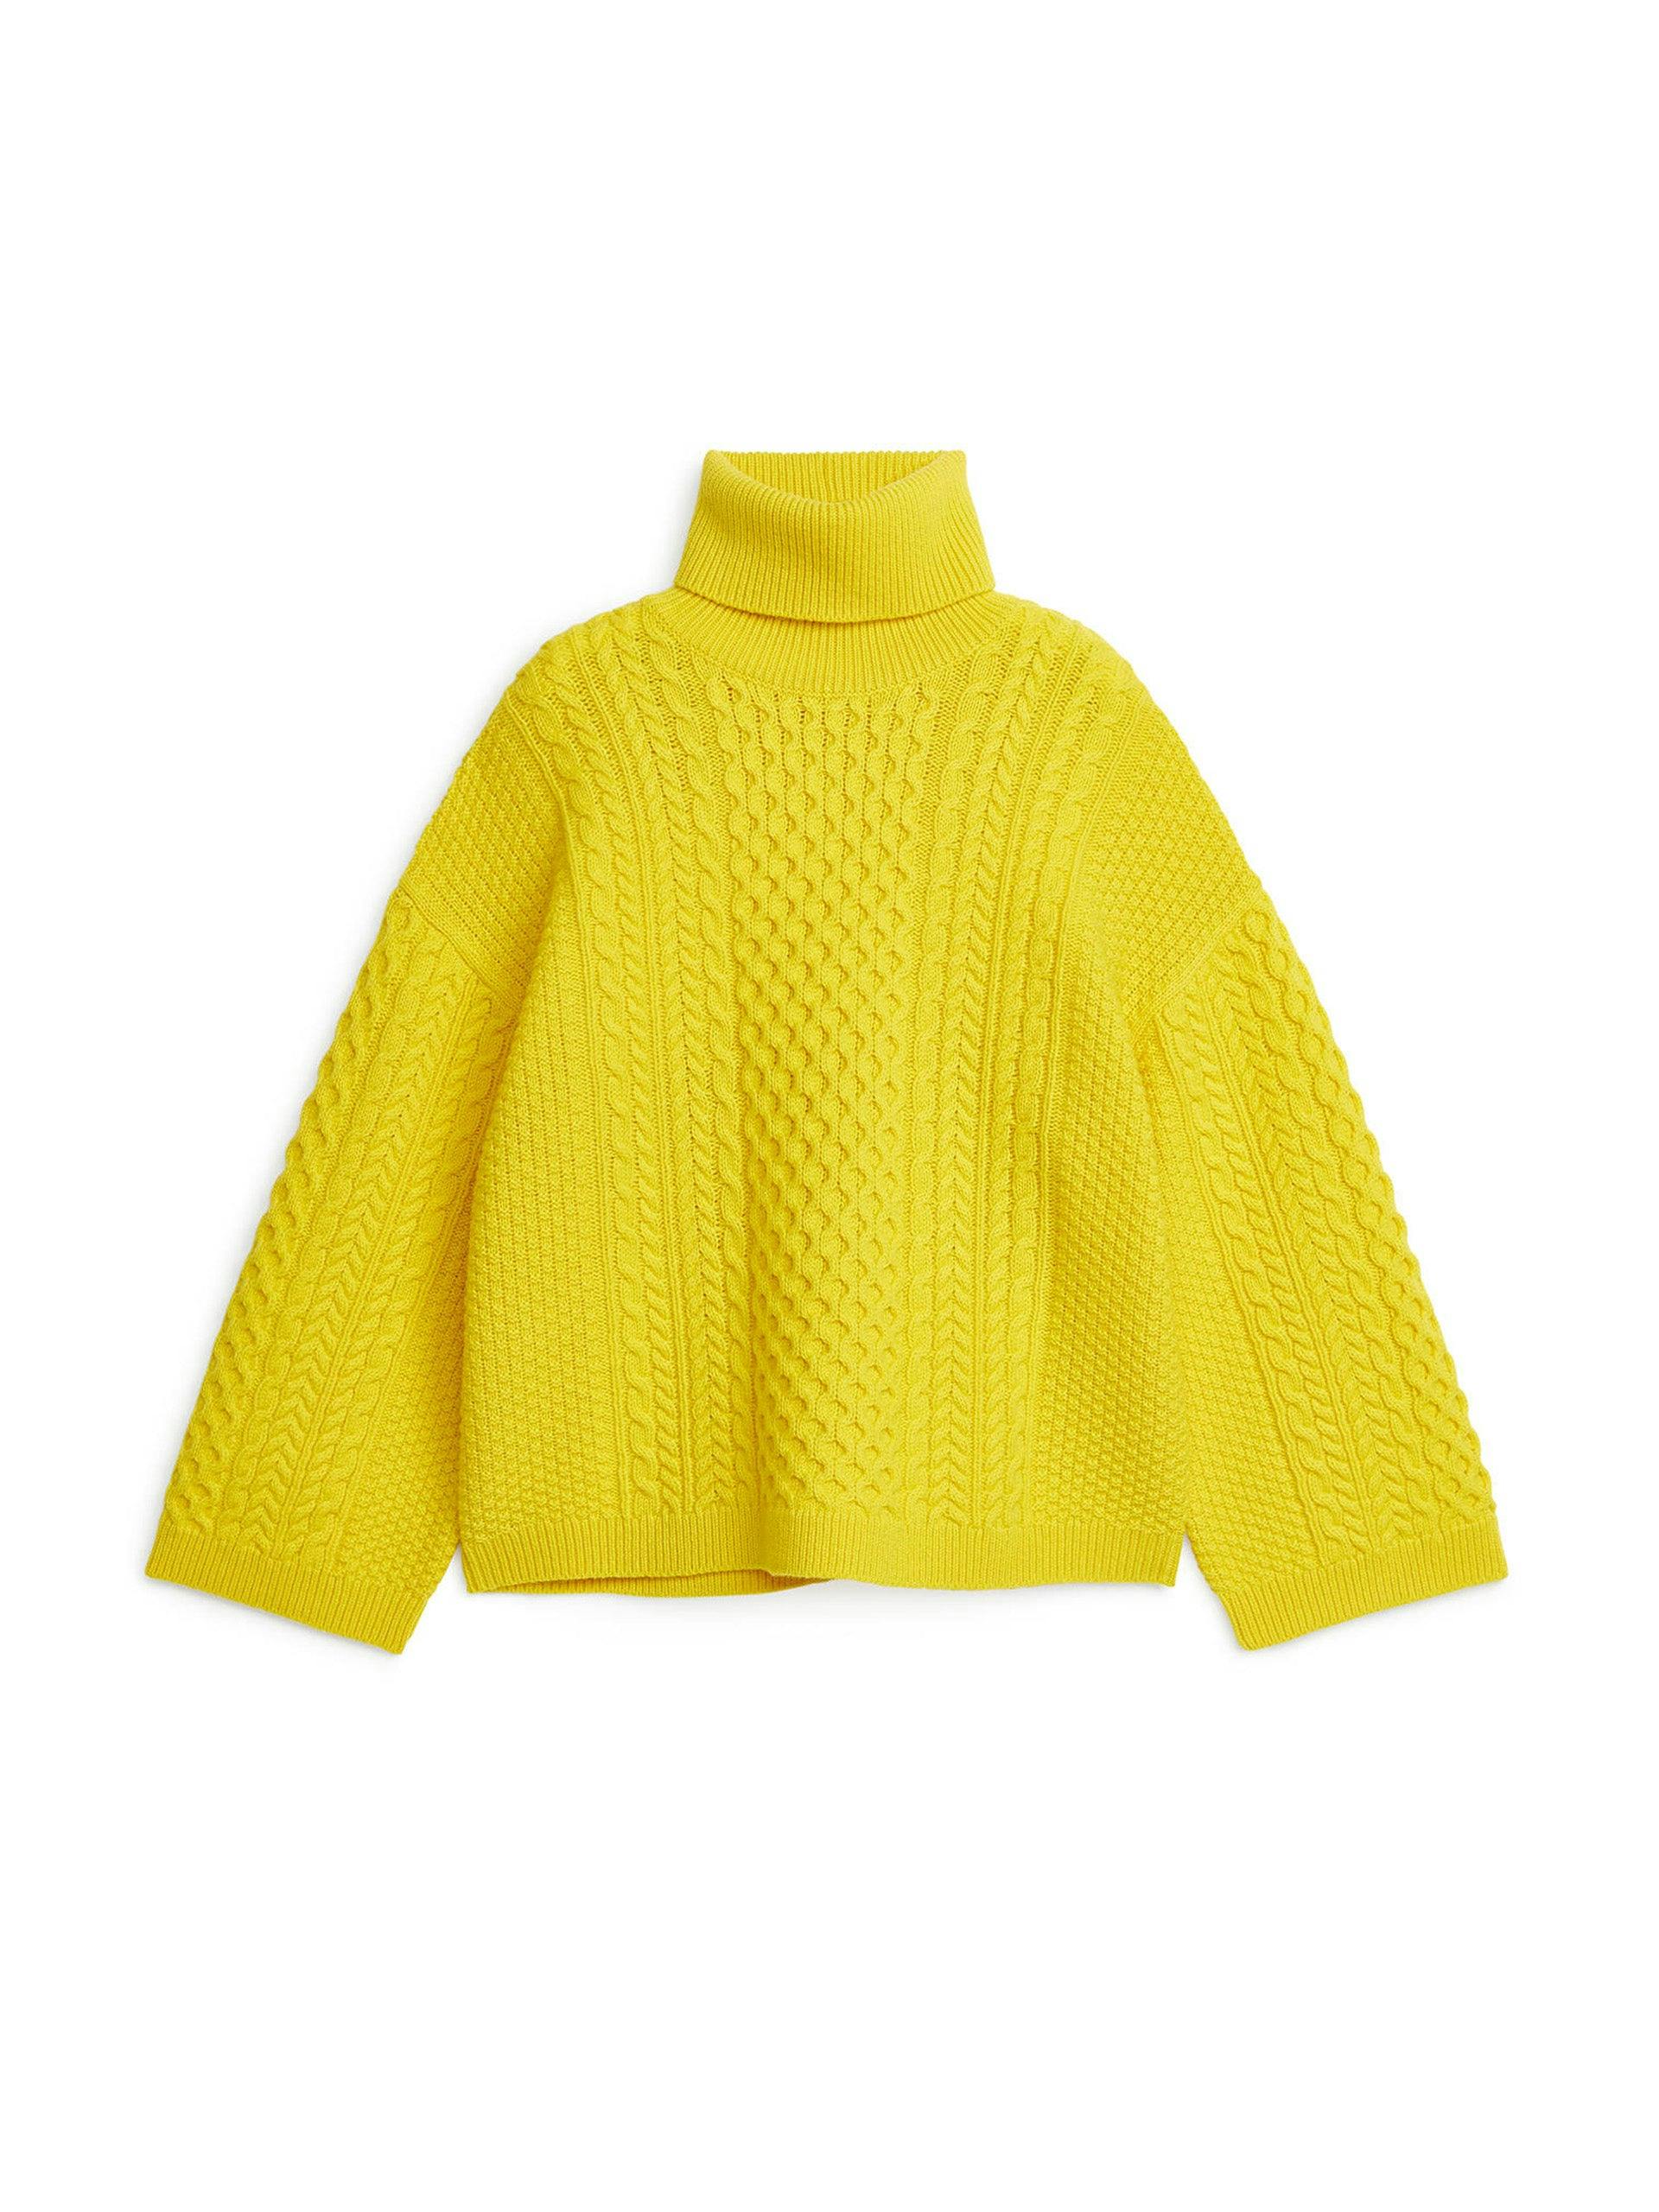 Yellow cable-knit jumper